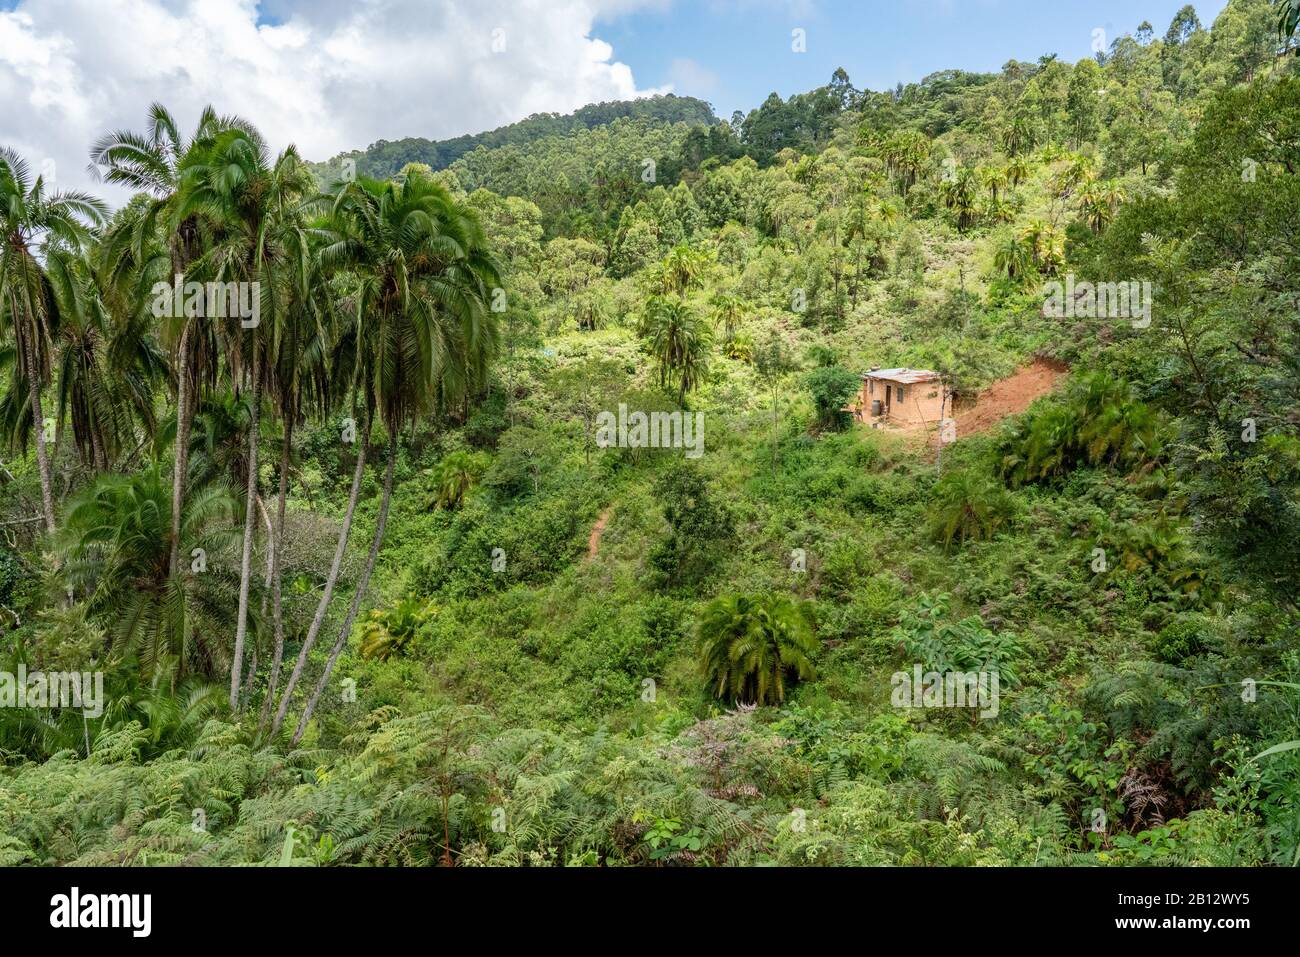 Small farmstead amidst lush tropical vegetation high in the Sagalla Hills of Southern Kenya near the town of Voi Stock Photo